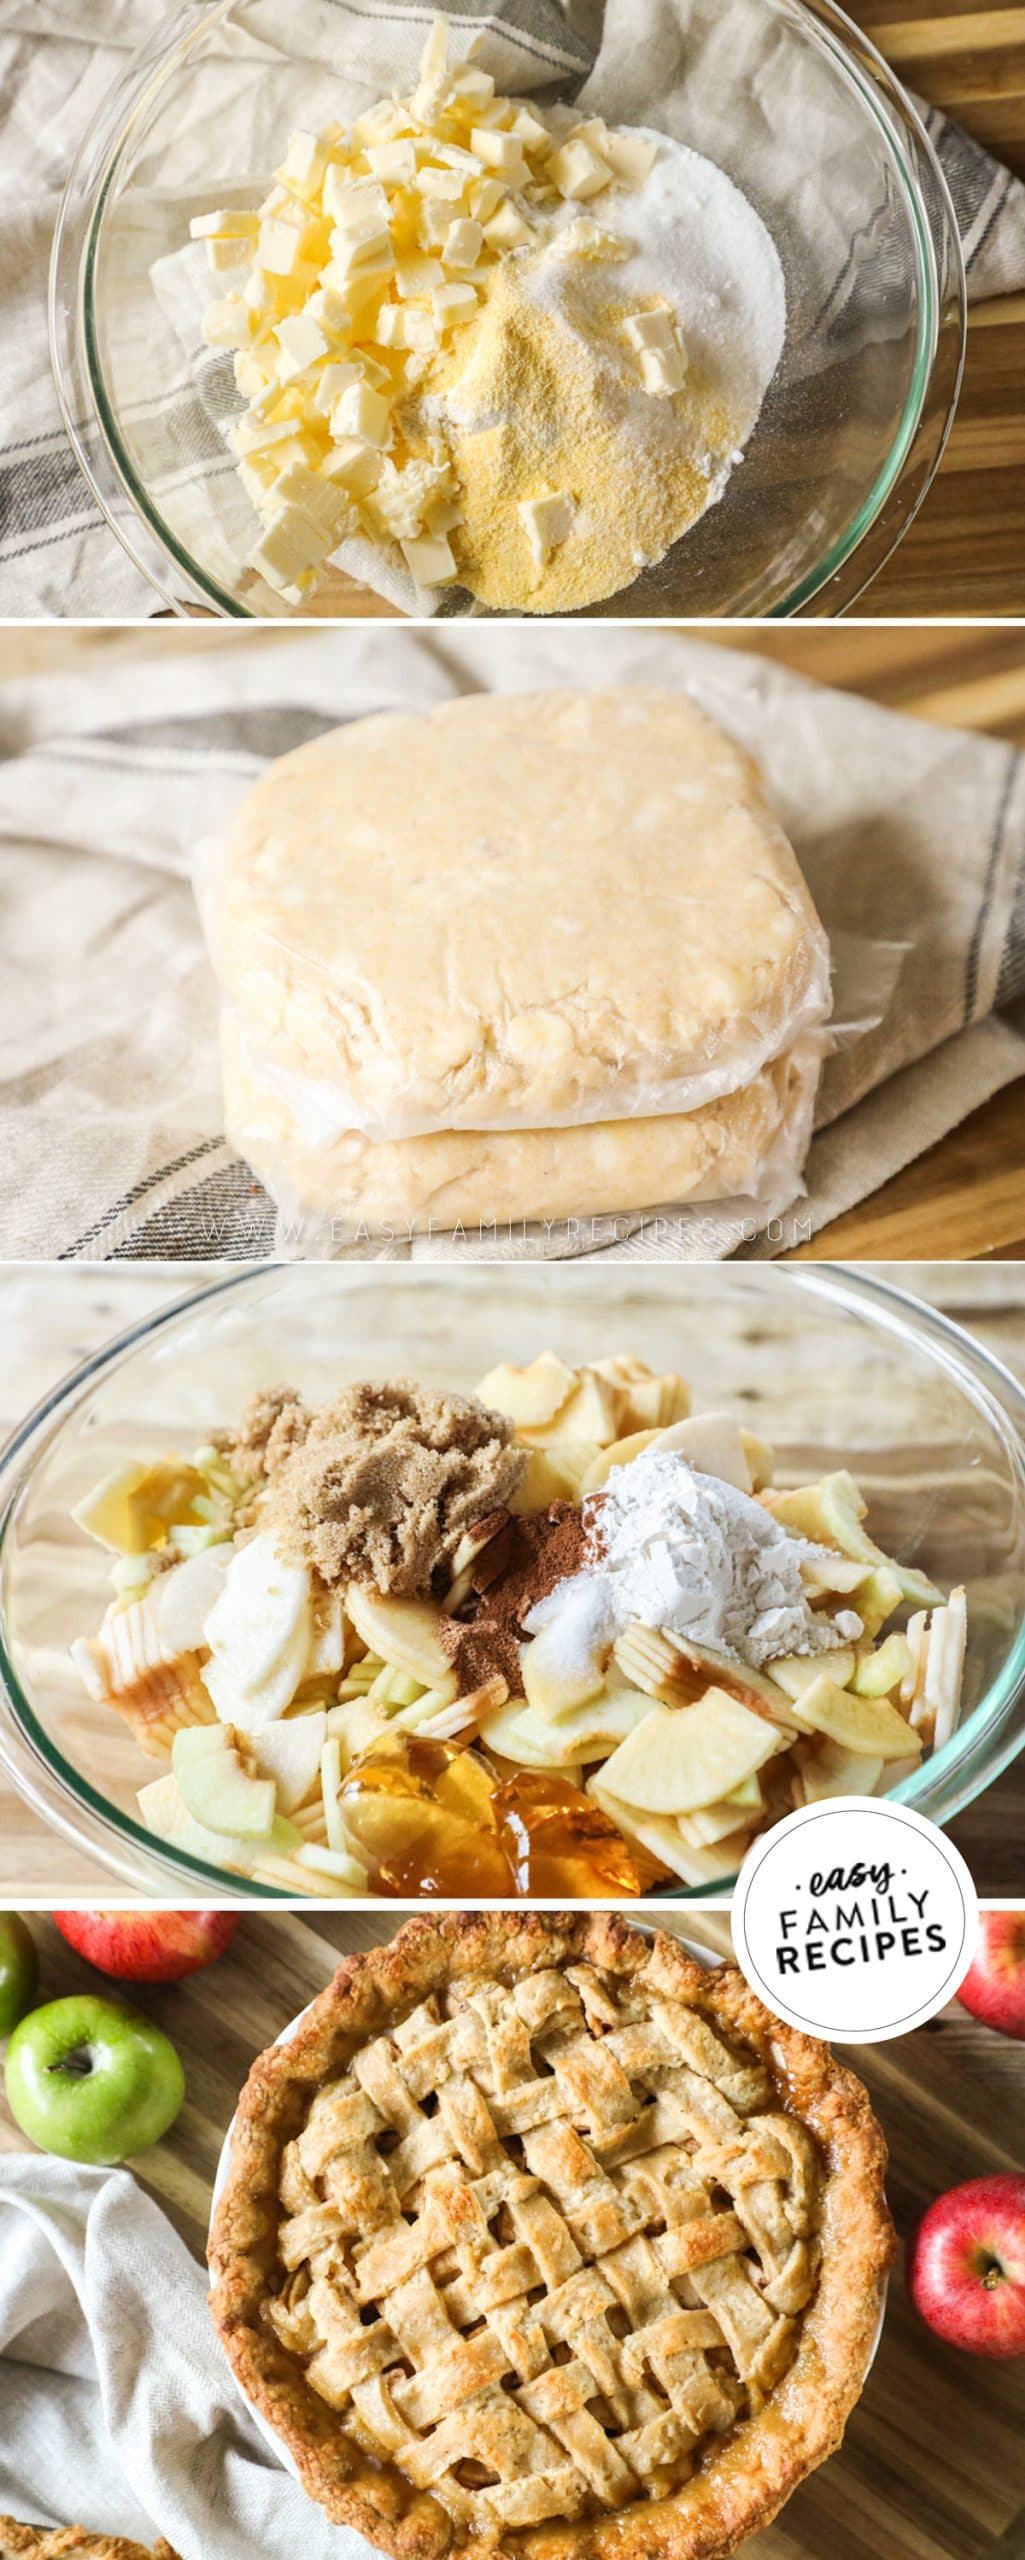 Steps for making apple pie from scratch. 1. Prepare cornmeal crust. 2. Refrigerate pie crust to set it. 3. Prepare apple pie filling. 4. Roll out crusts and prepare pie then bake.